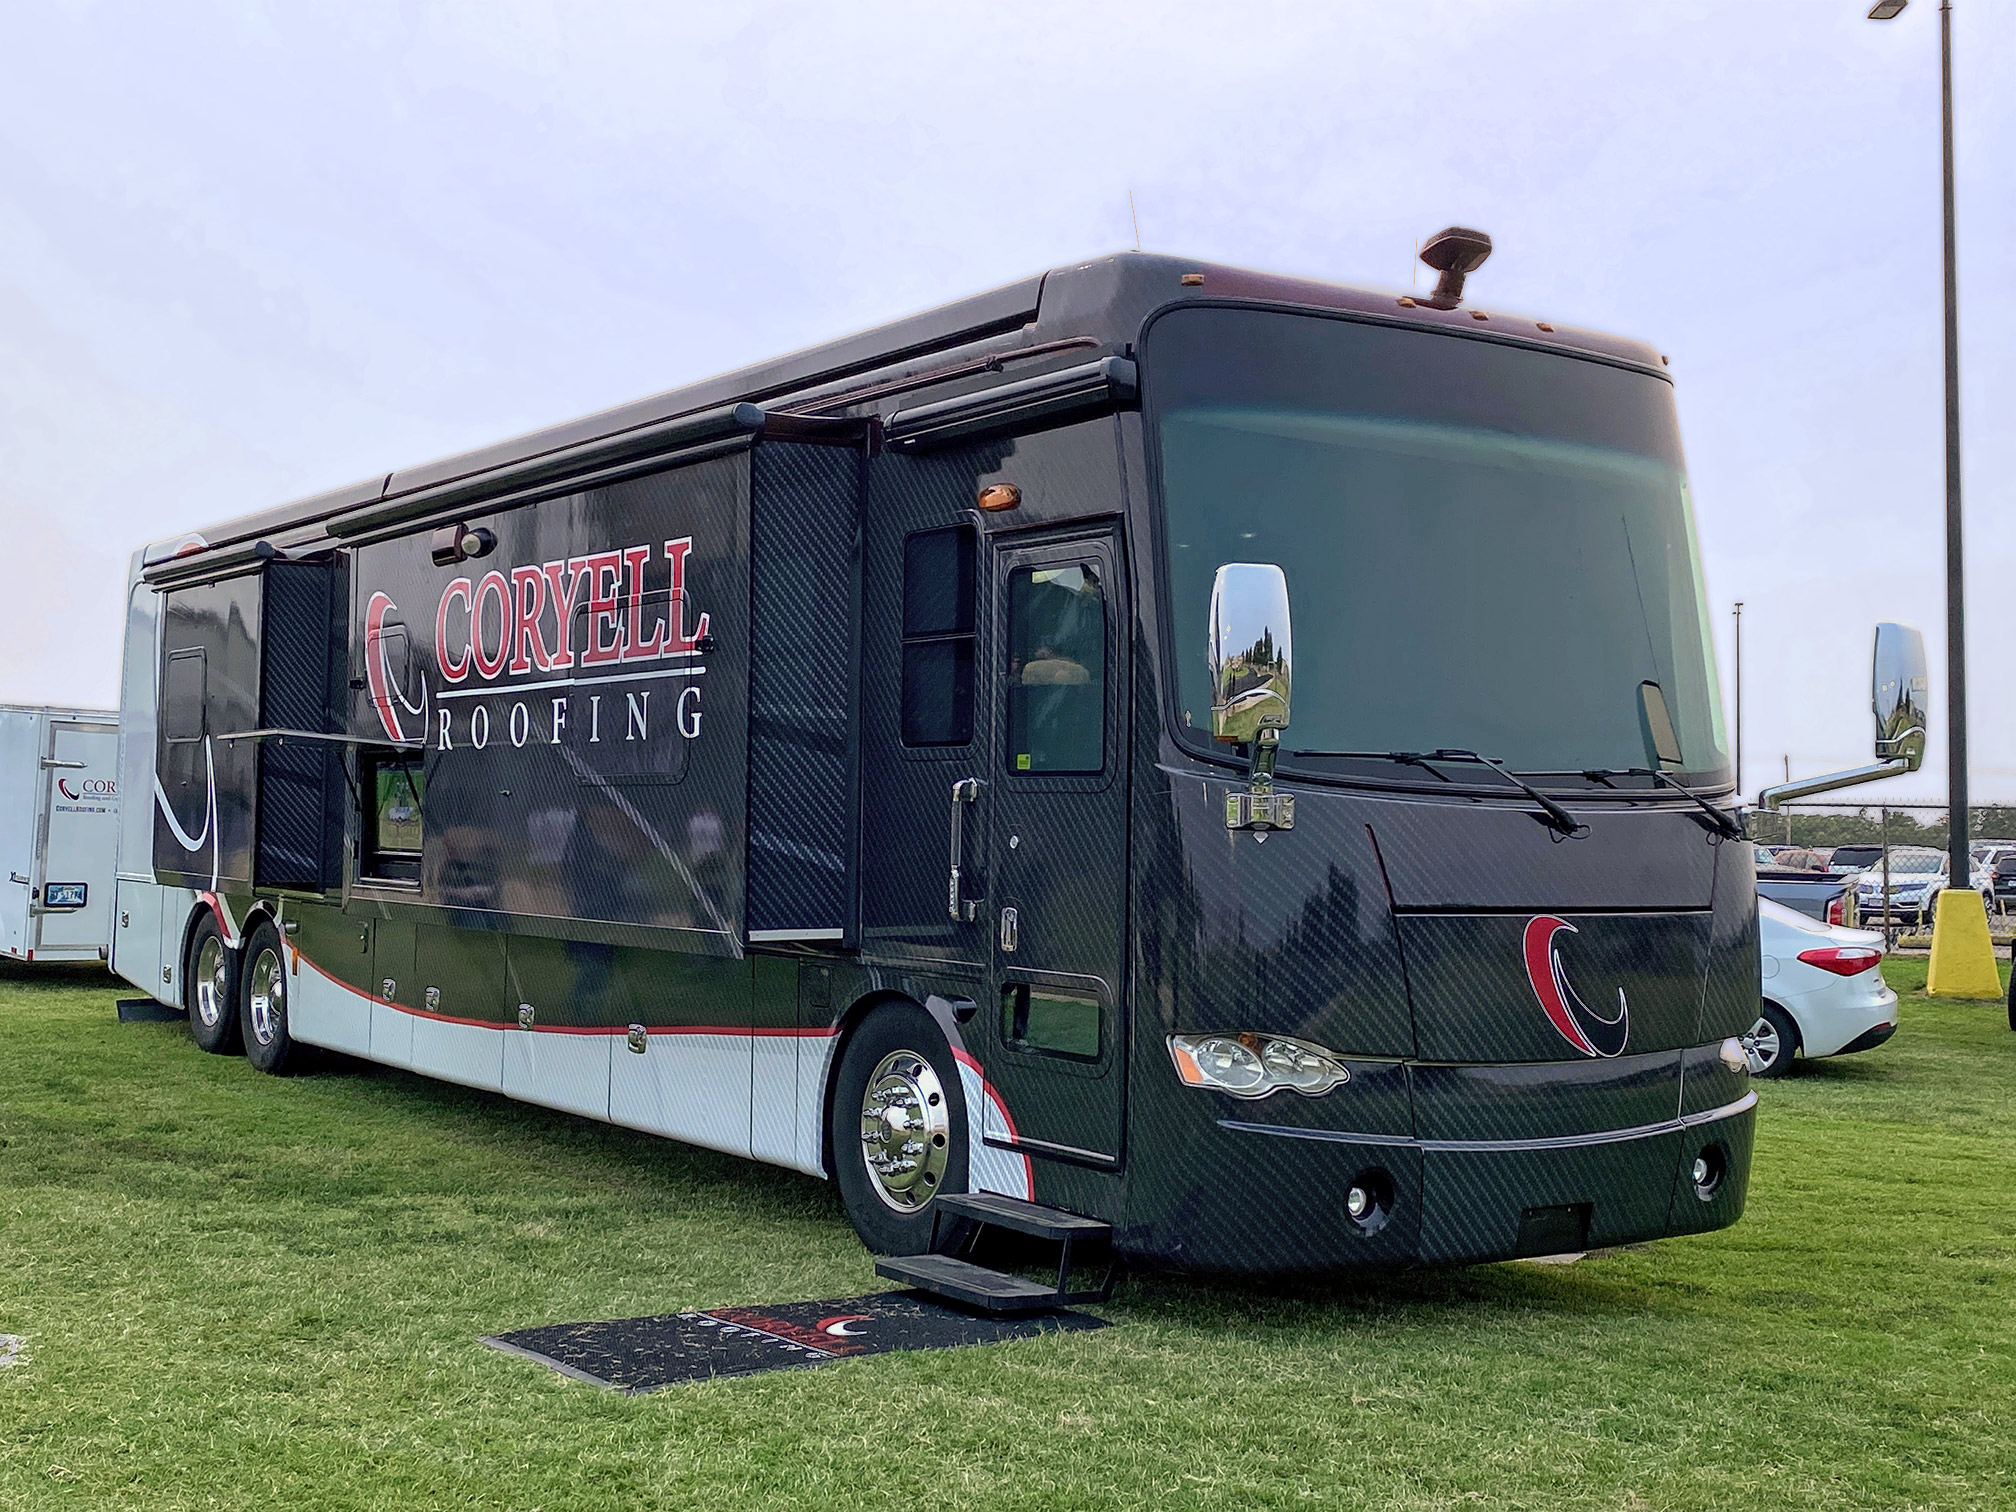 Coryell Roofing Road Show RV